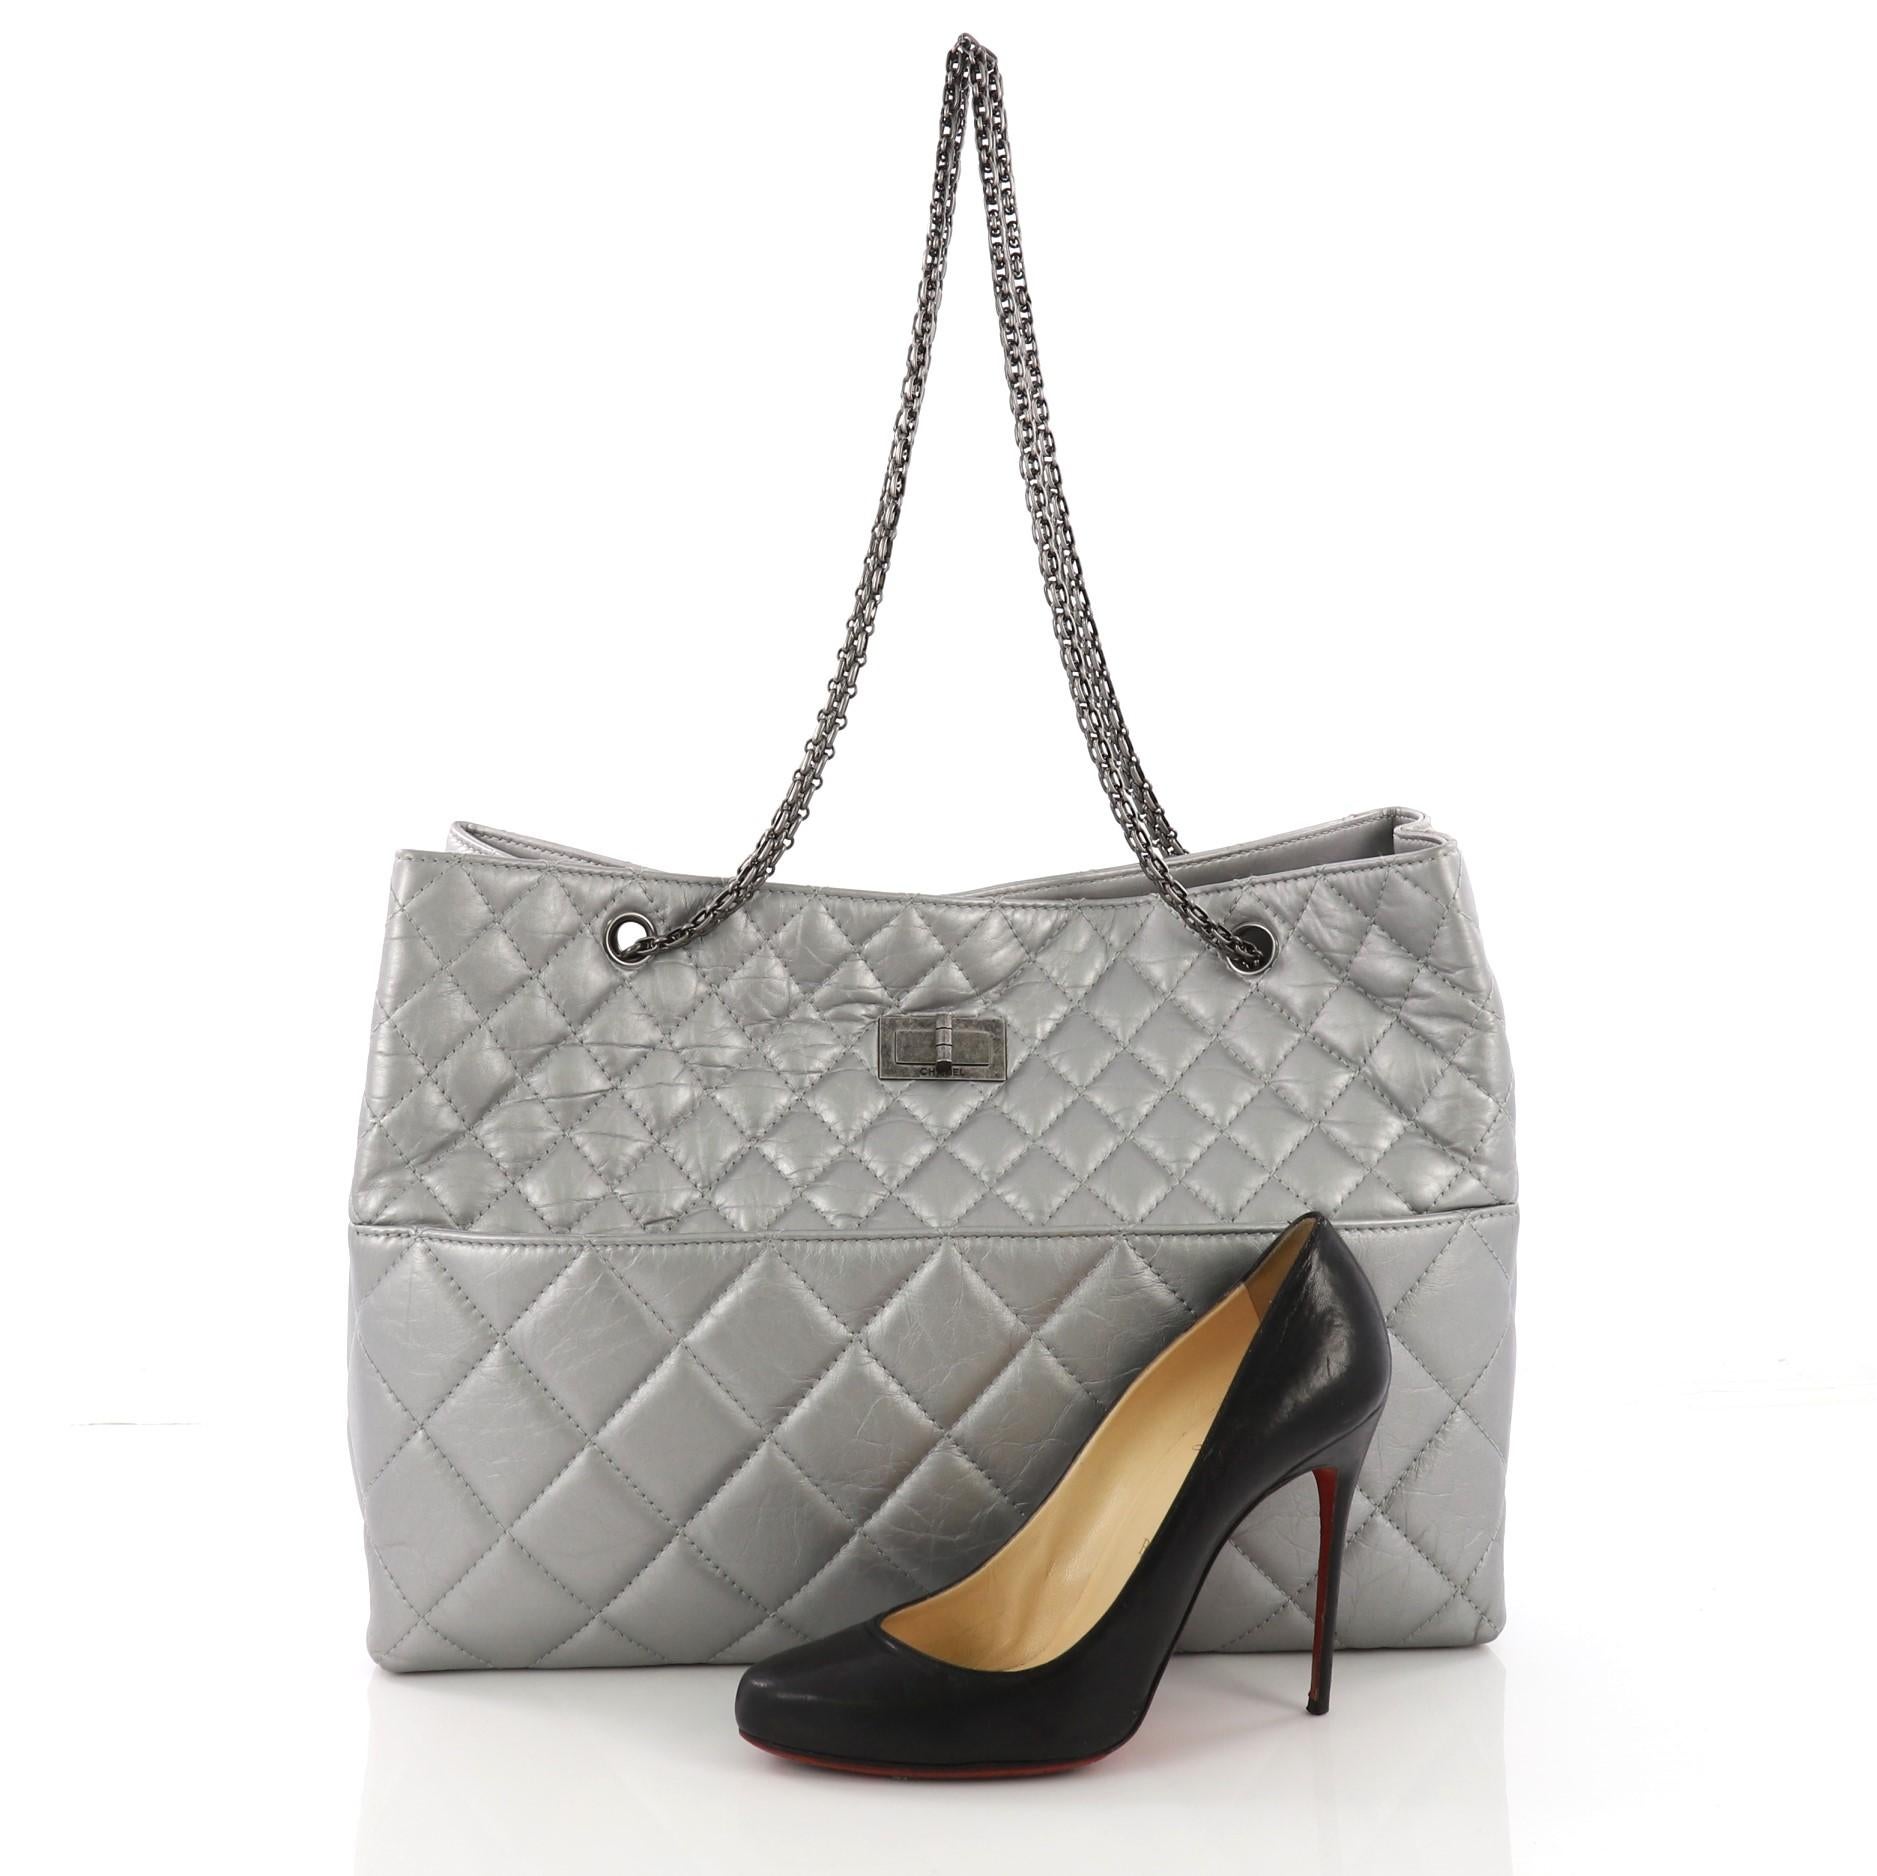 This Chanel Reissue Tote Quilted Aged Calfskin East West, crafted in silver quilted aged calfskin leather, features iconic mademoiselle chain straps, front and back slip pockets, and aged silver-tone hardware. Its magnetic closure opens to a gray